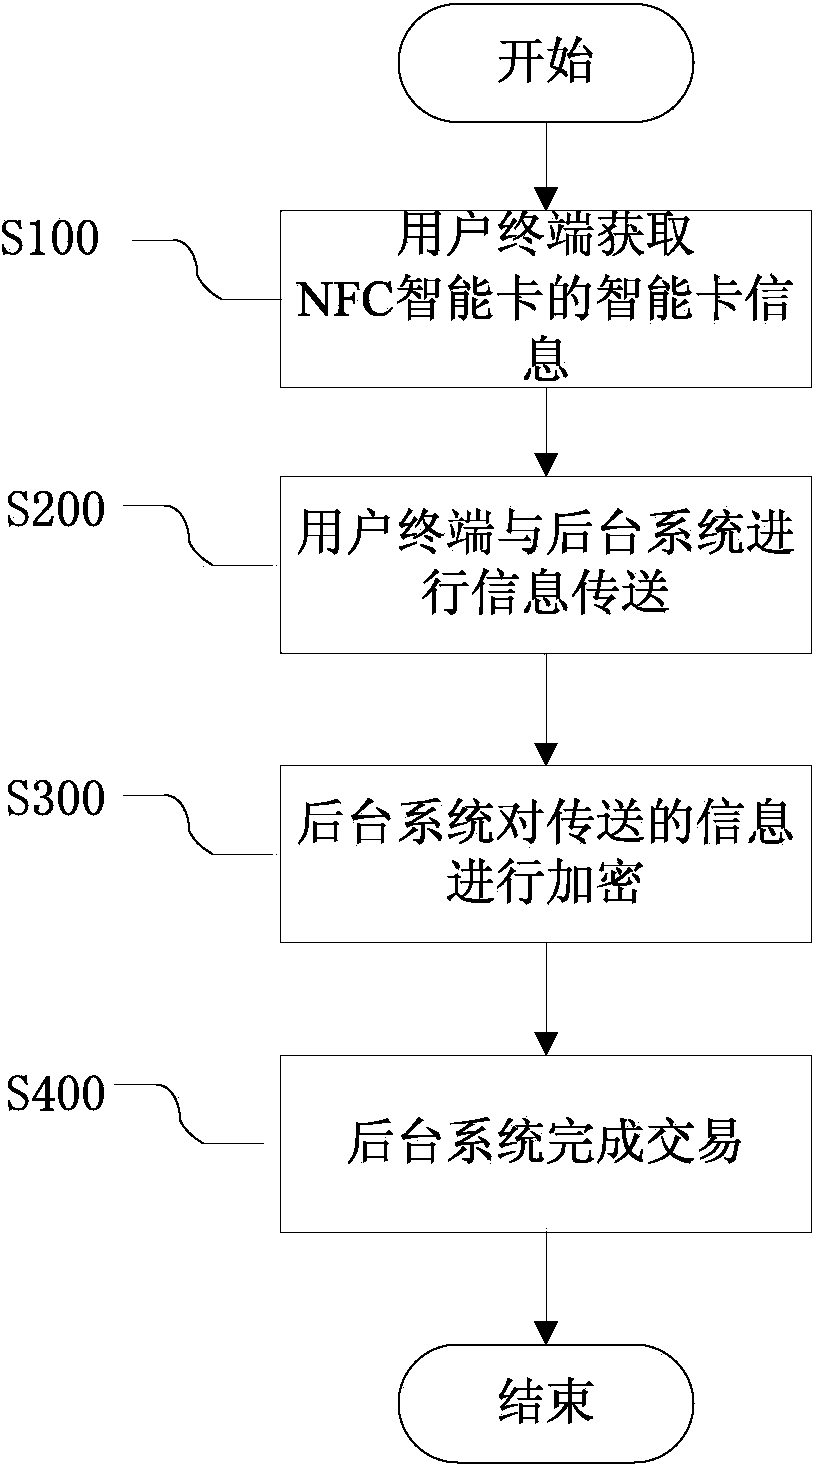 Payment processing method based on NFC (Near Field Communication) intelligent card and payment processing system based on NFC intelligent card